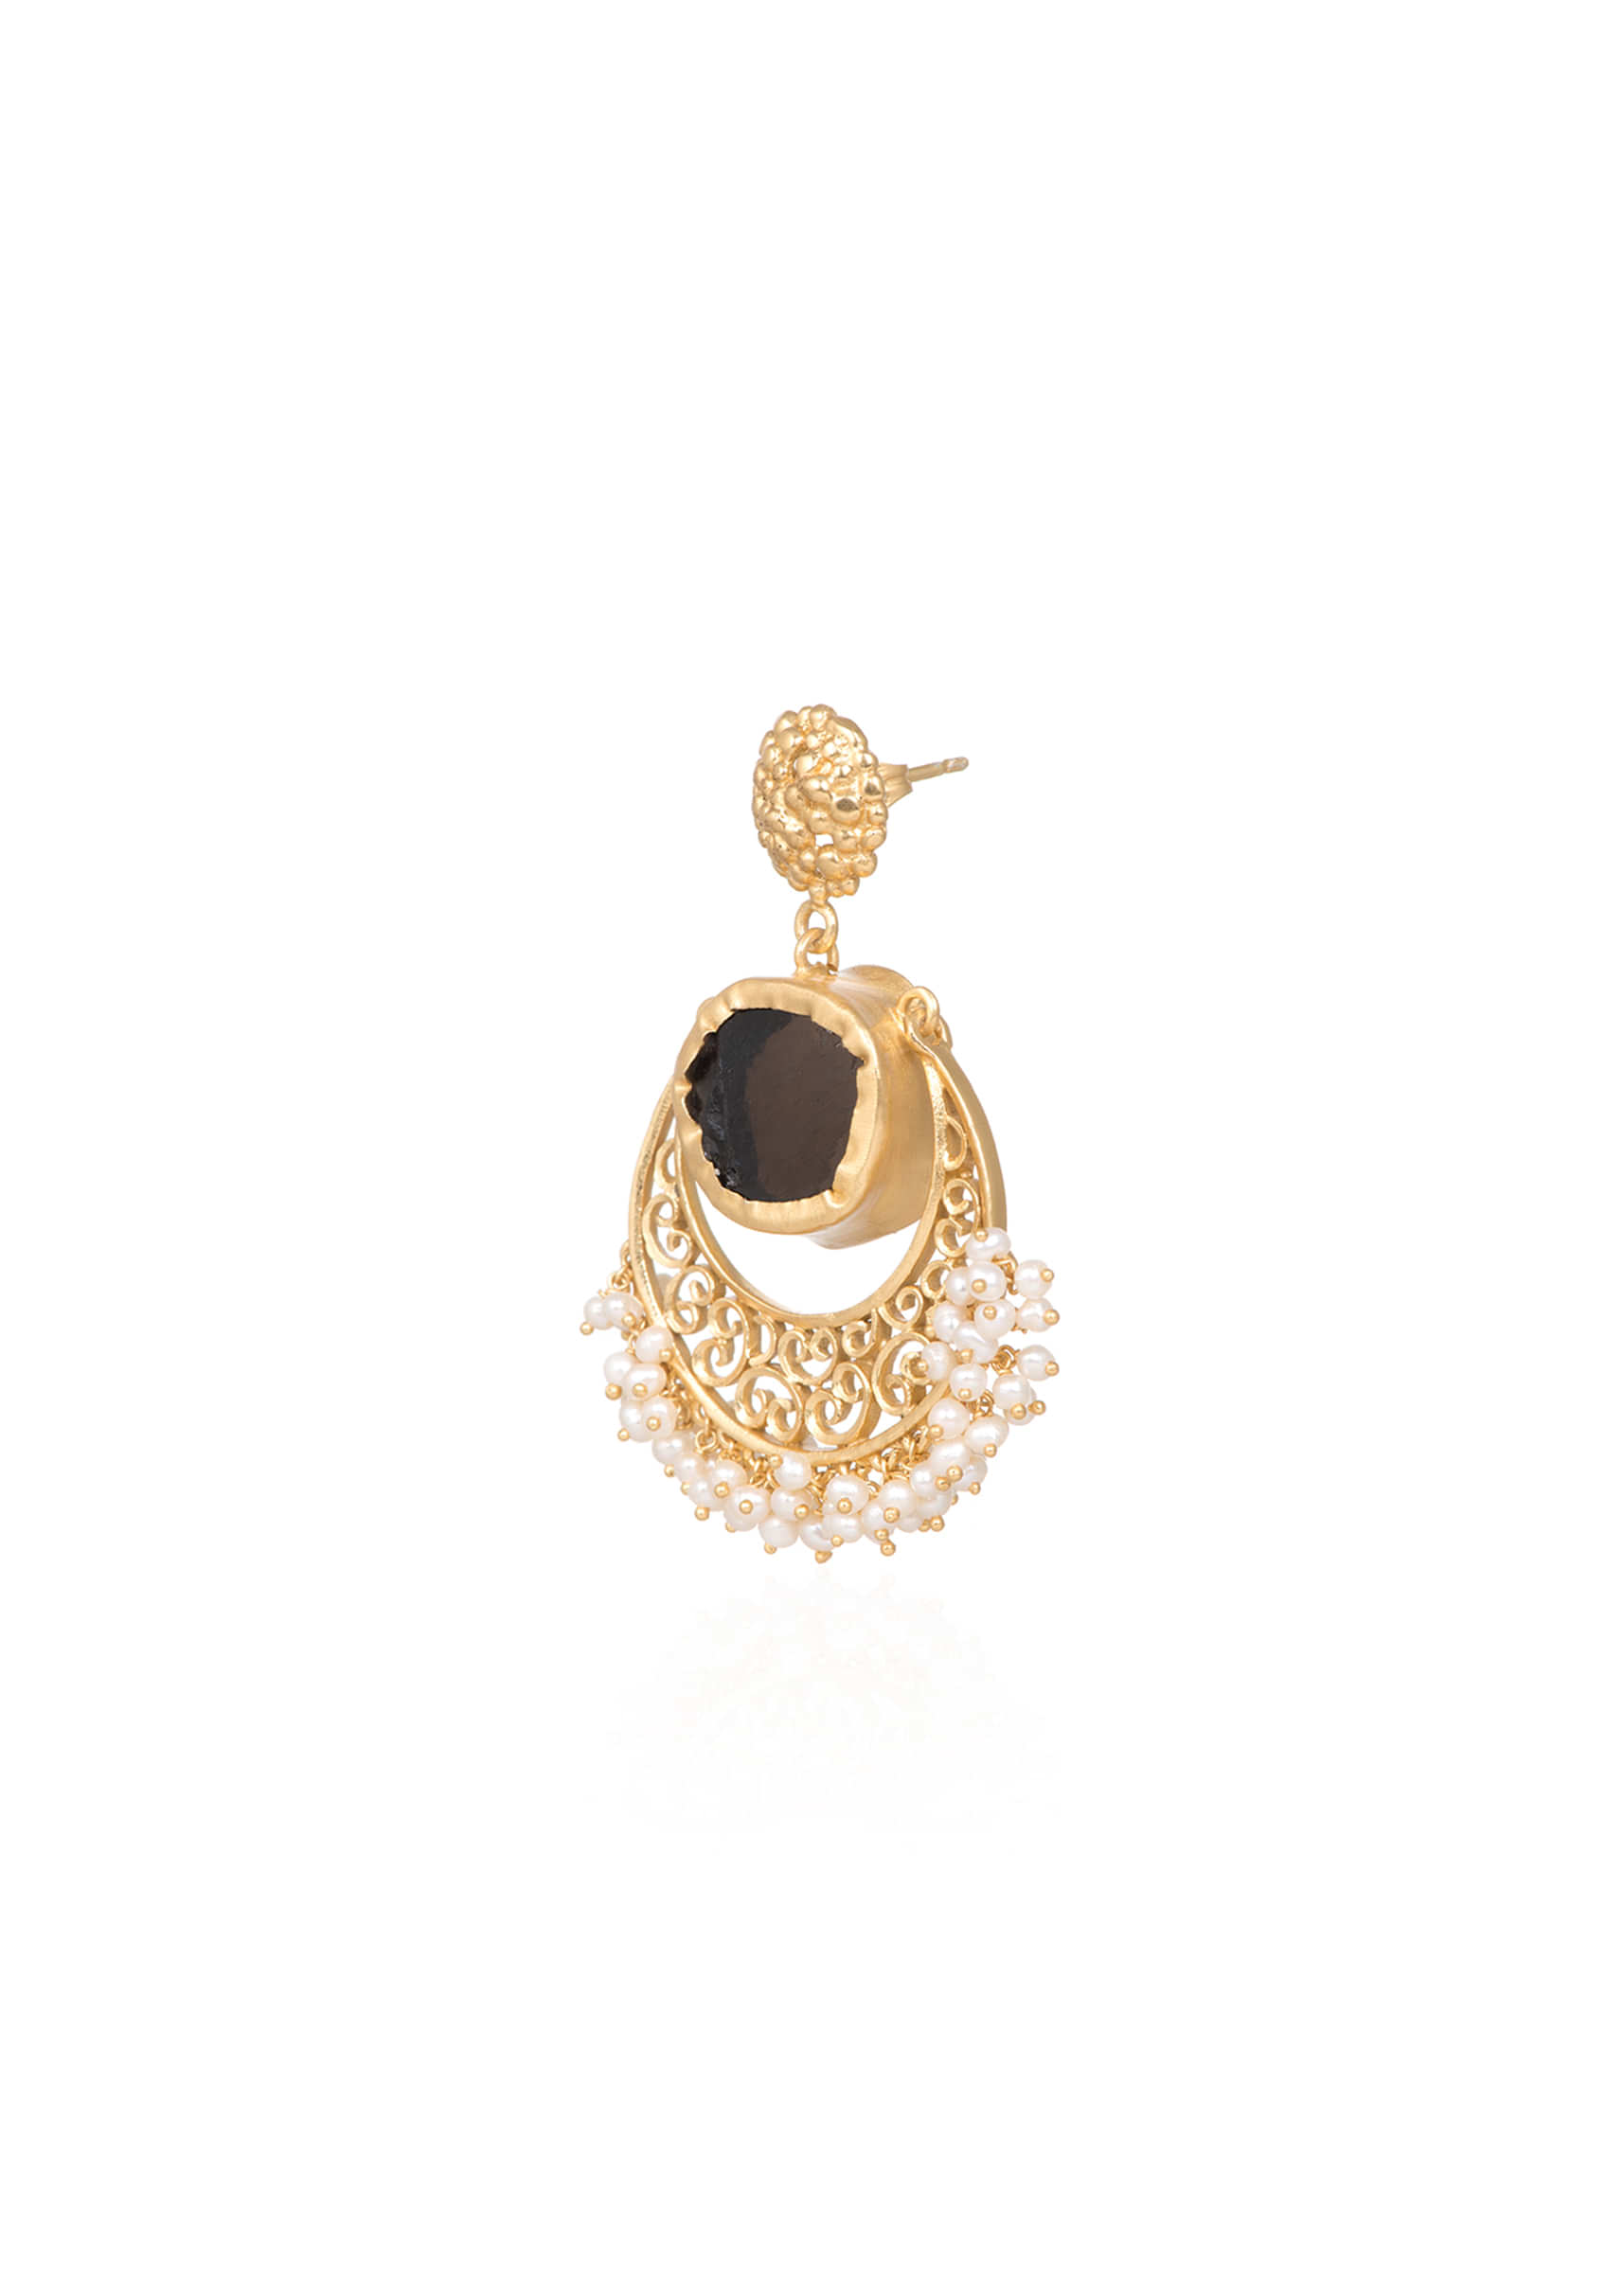 Gold Plated Earrings With Smoky Topaz And Tiny Bits Of Pearls By Zariin